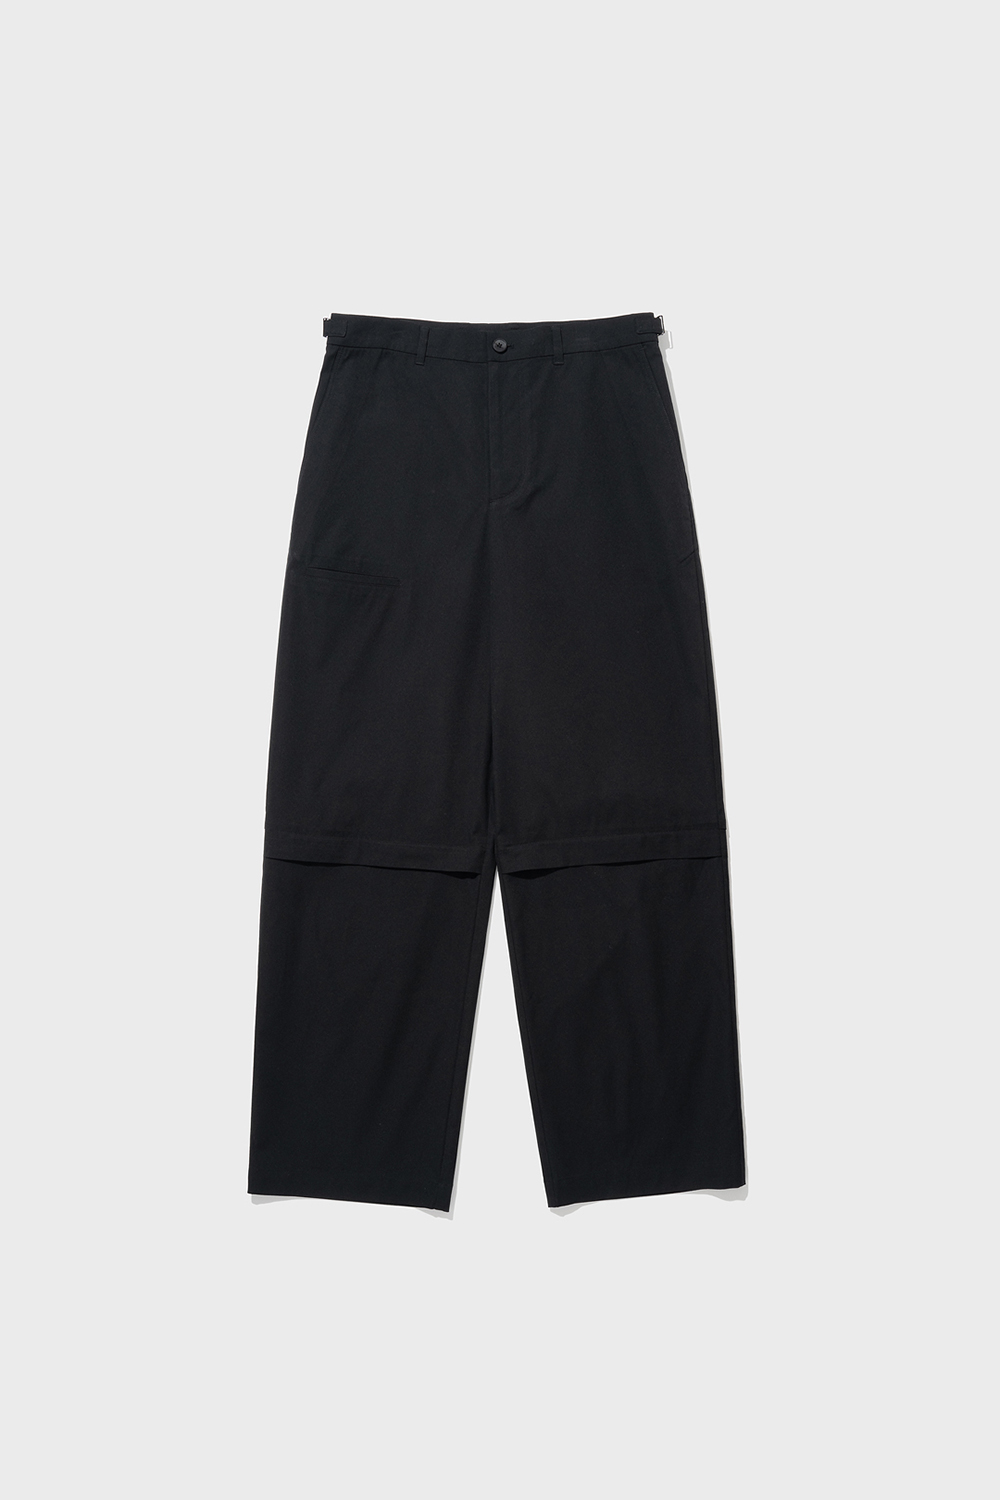 ALL WEATHER PANTS (BLACK)